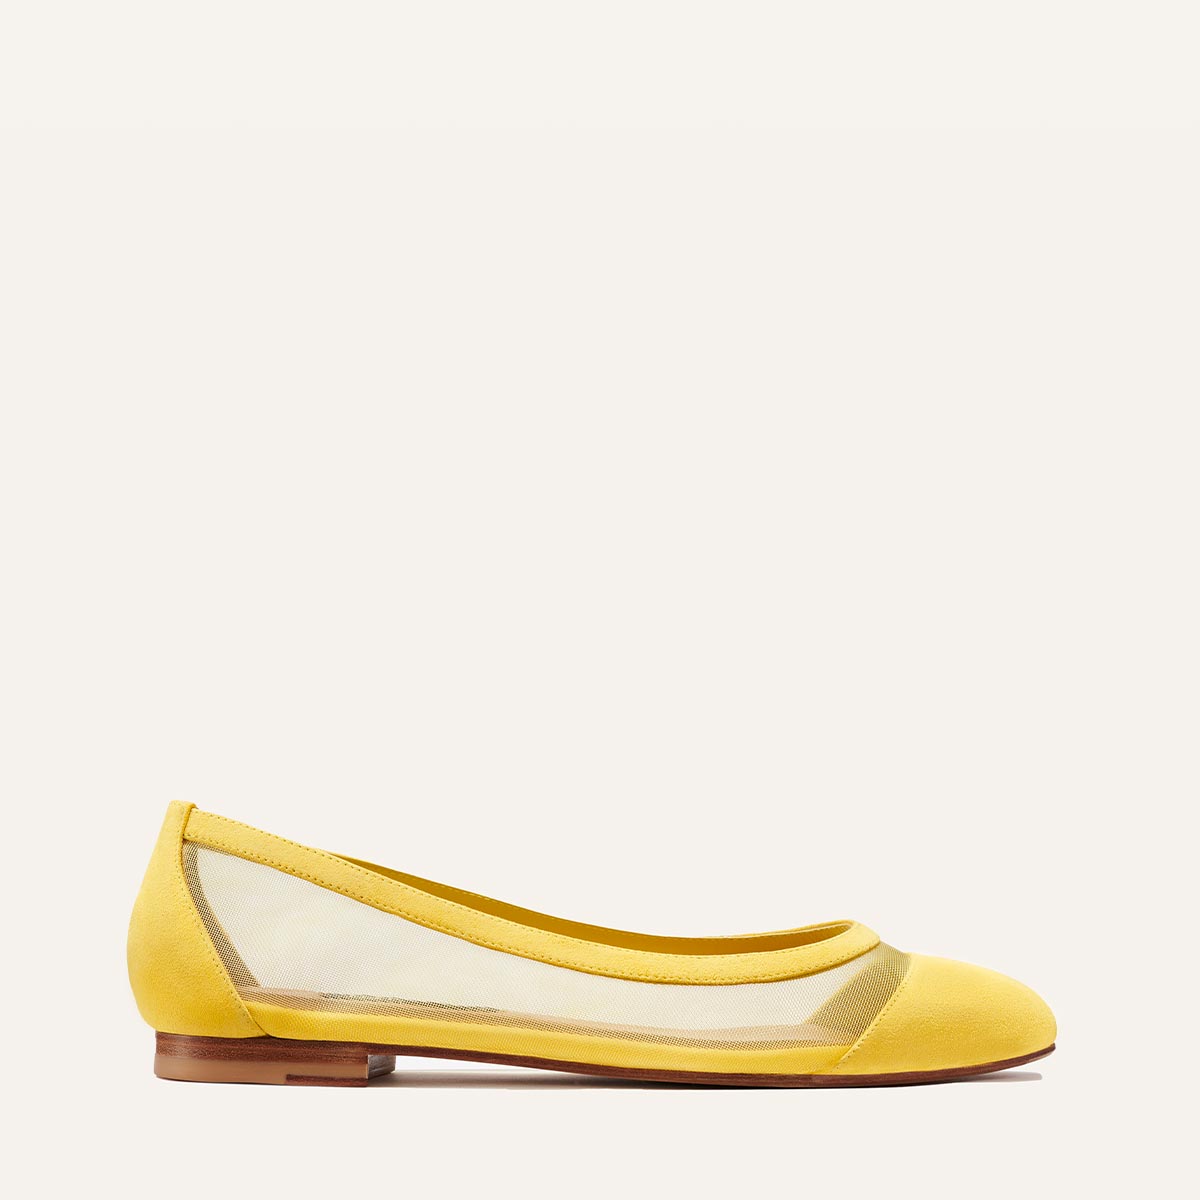 Margaux's classic and comfortable Pointe ballet flat in yellow suede and mesh with an elegant pointed toe